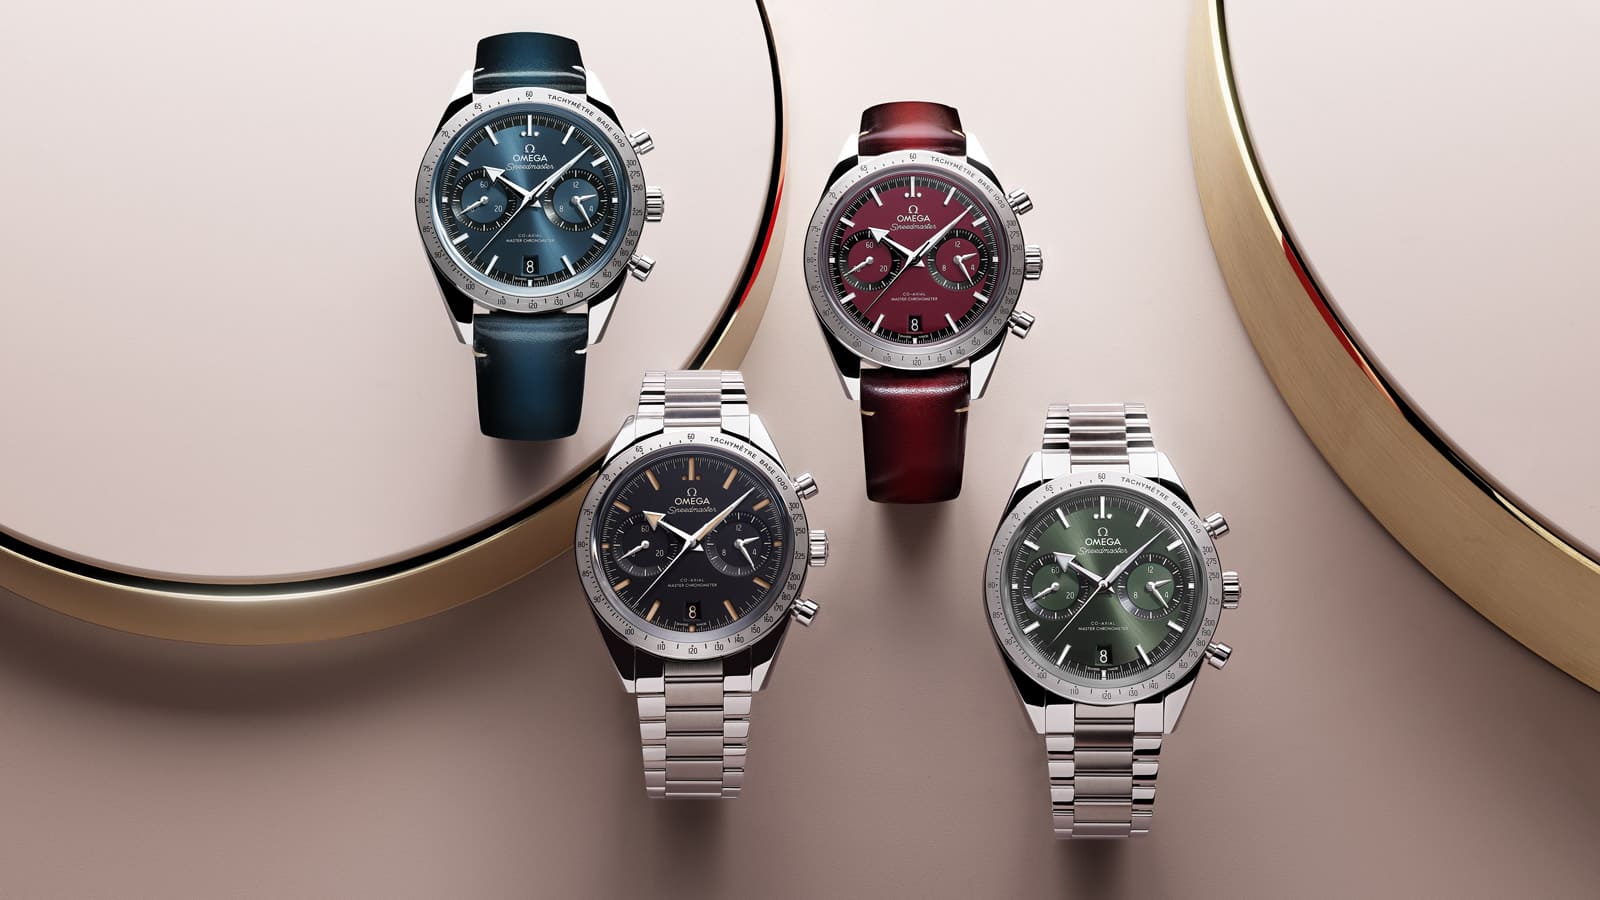 The Speedmaster 57 Collection